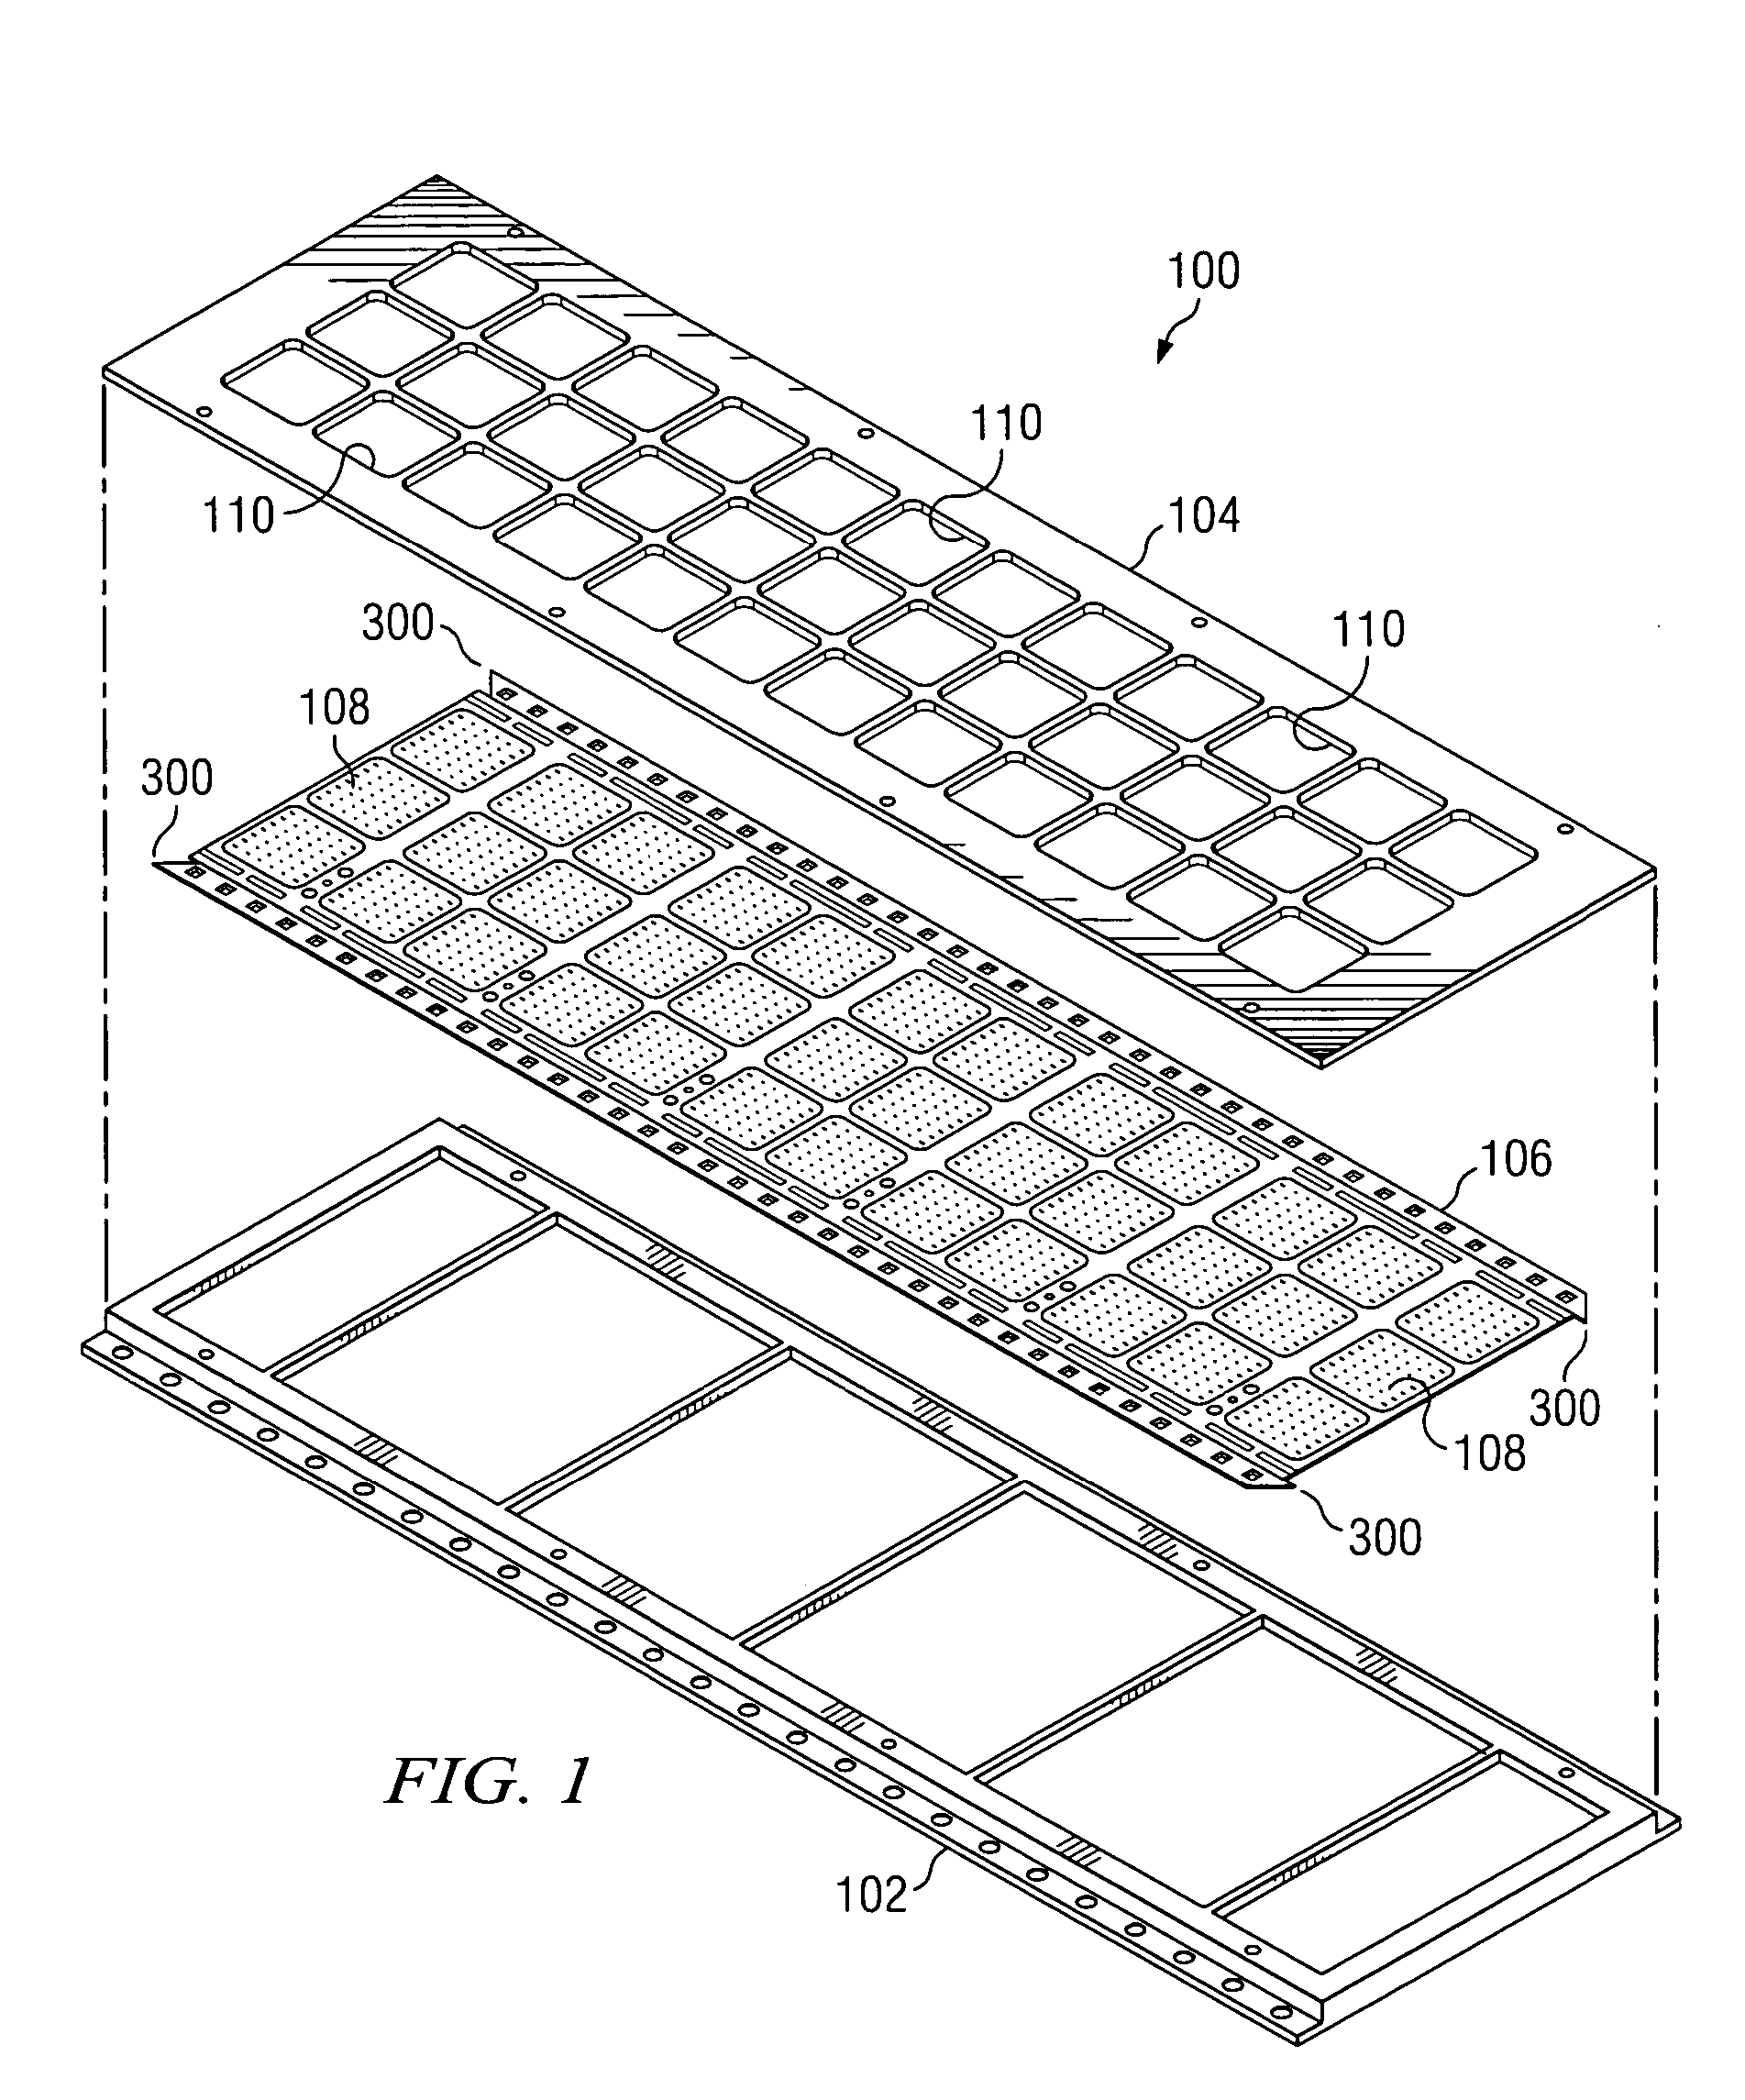 System and method for improved auto-boating